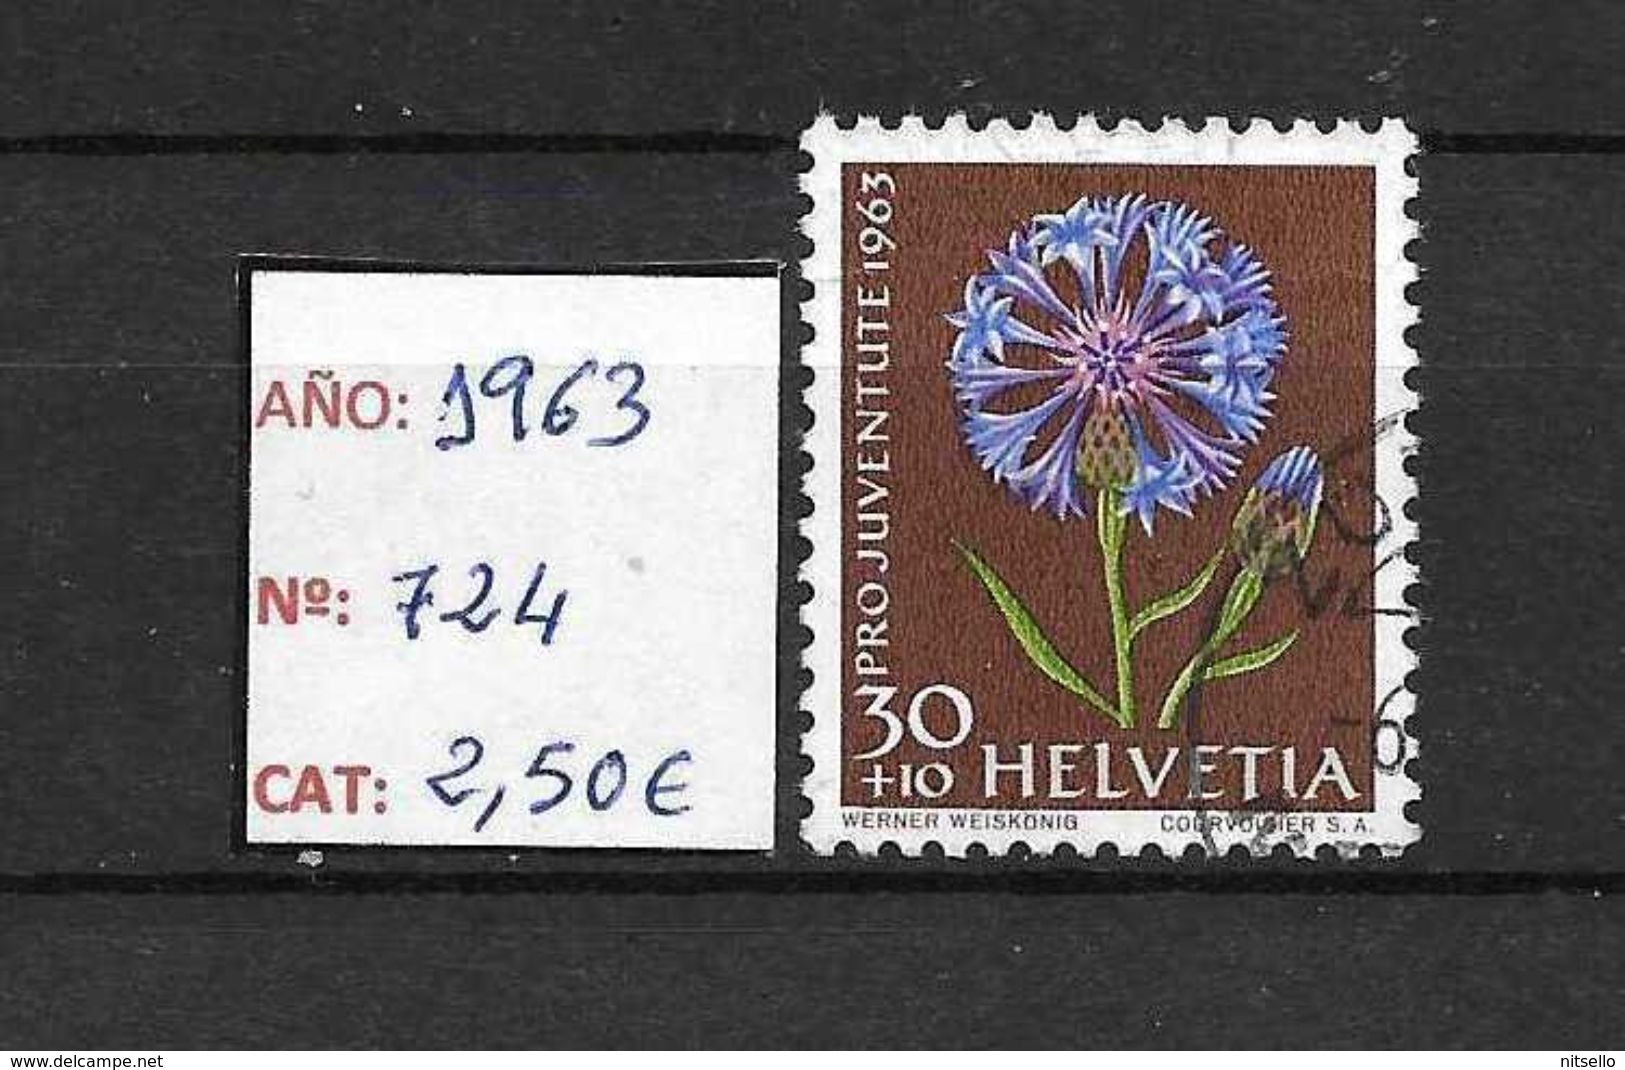 LOTE 1377  ///  SUIZA 1963   YVERT Nº: 724  //  CATALOG/COTE: 2,50€ - Used Stamps